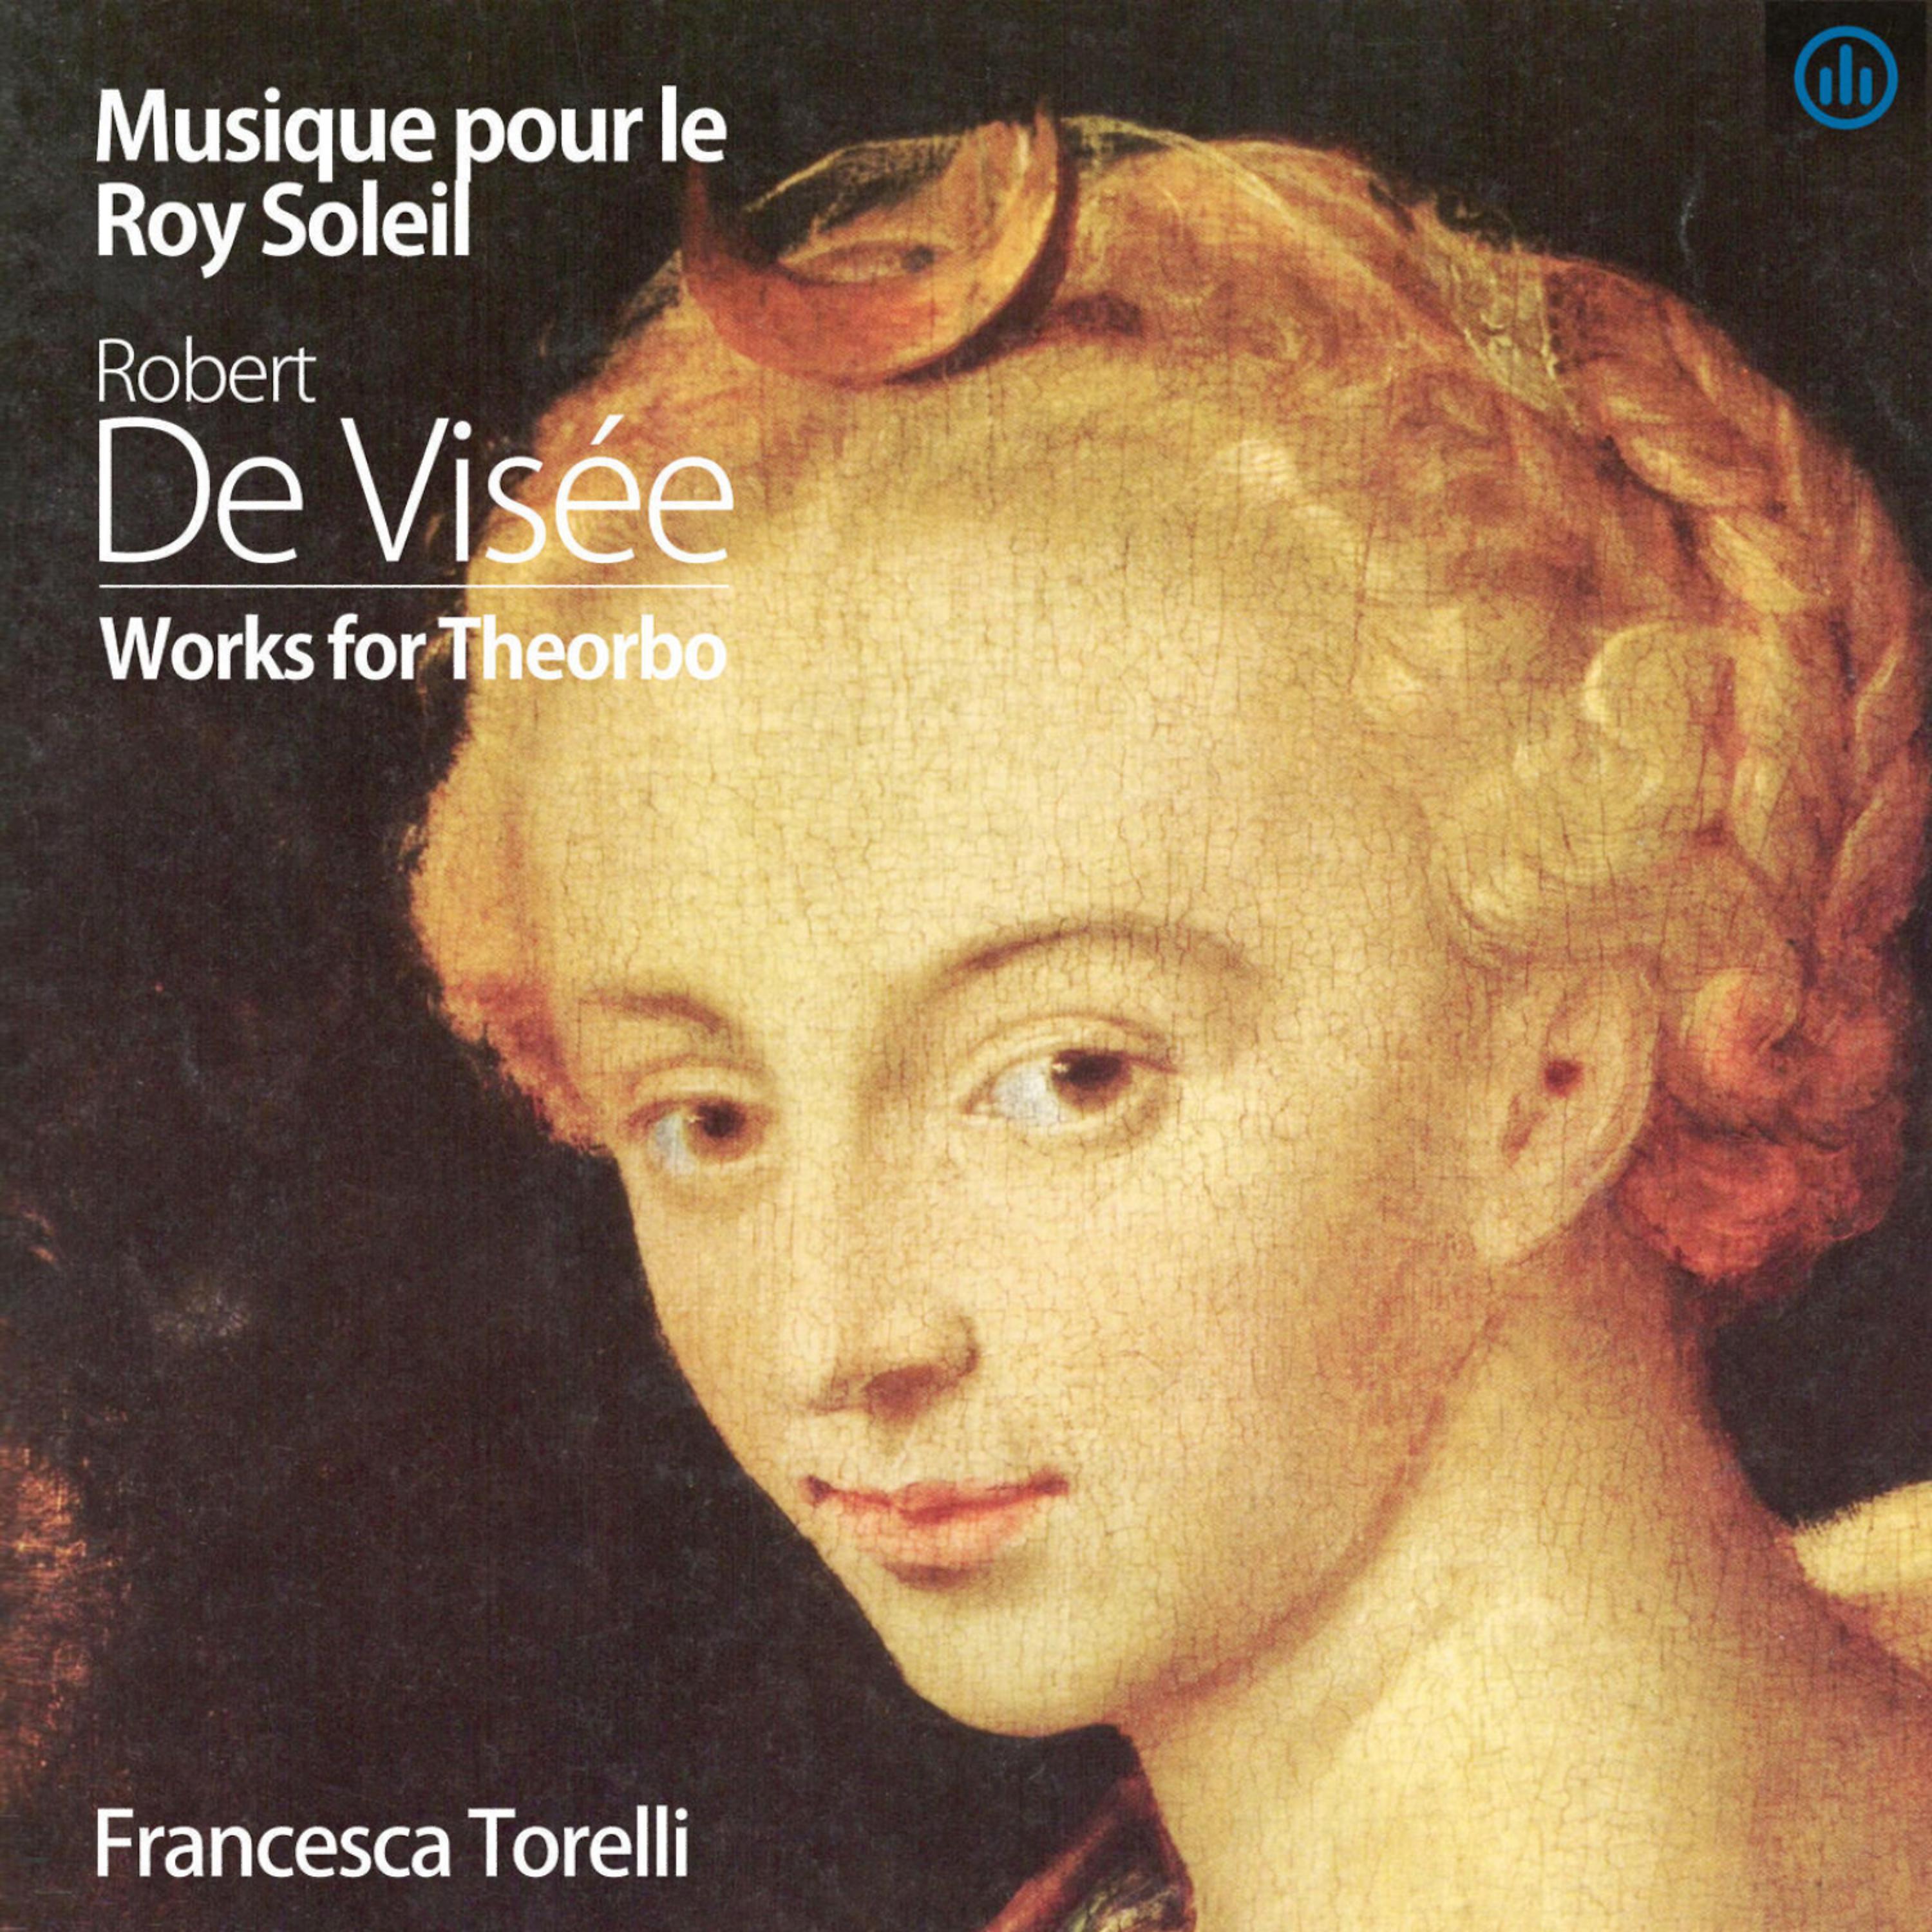 Постер альбома Musique pour le Roy Soleil, Robert de Visee, Works for Theorbo